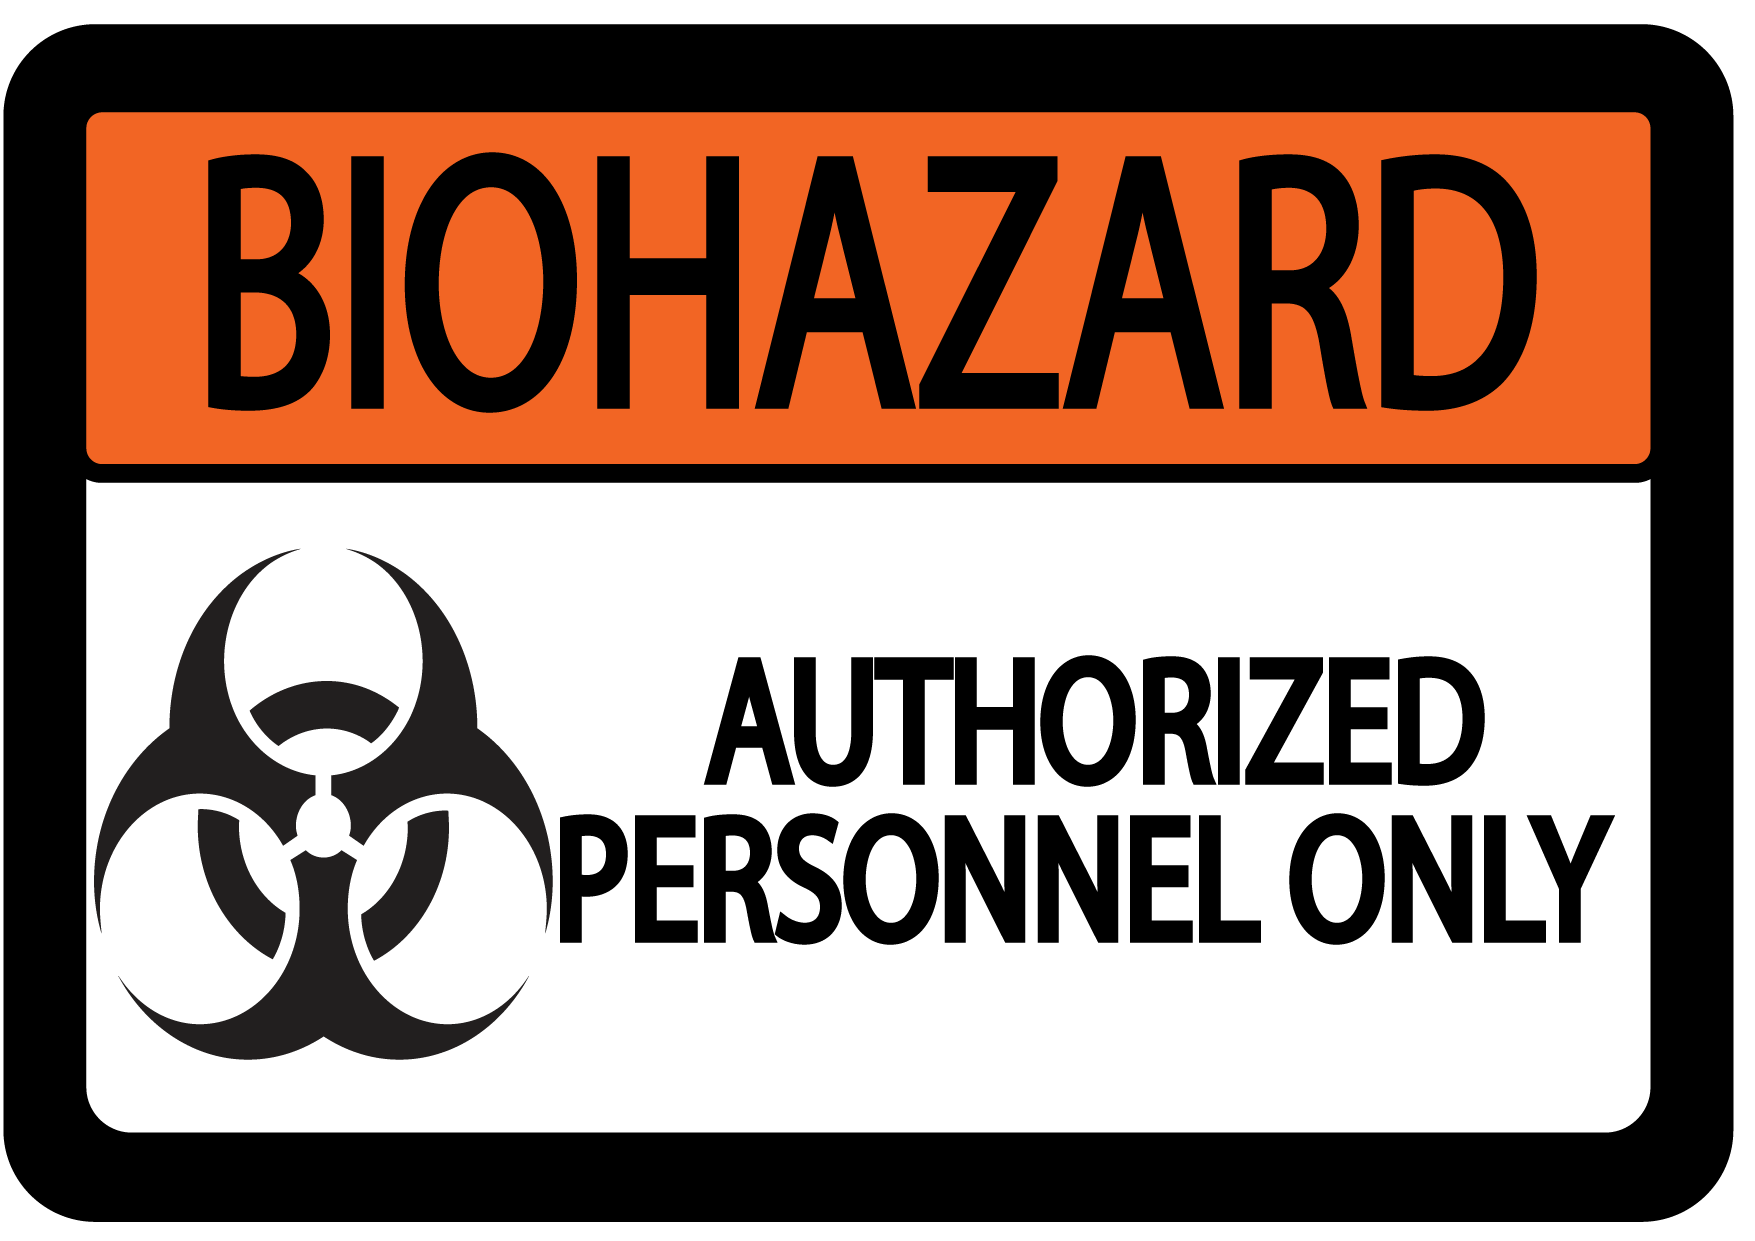 "Biohazard, Authorized Personnel Only" Durable Matte Laminated Vinyl Floor Sign- Various Sizes Available